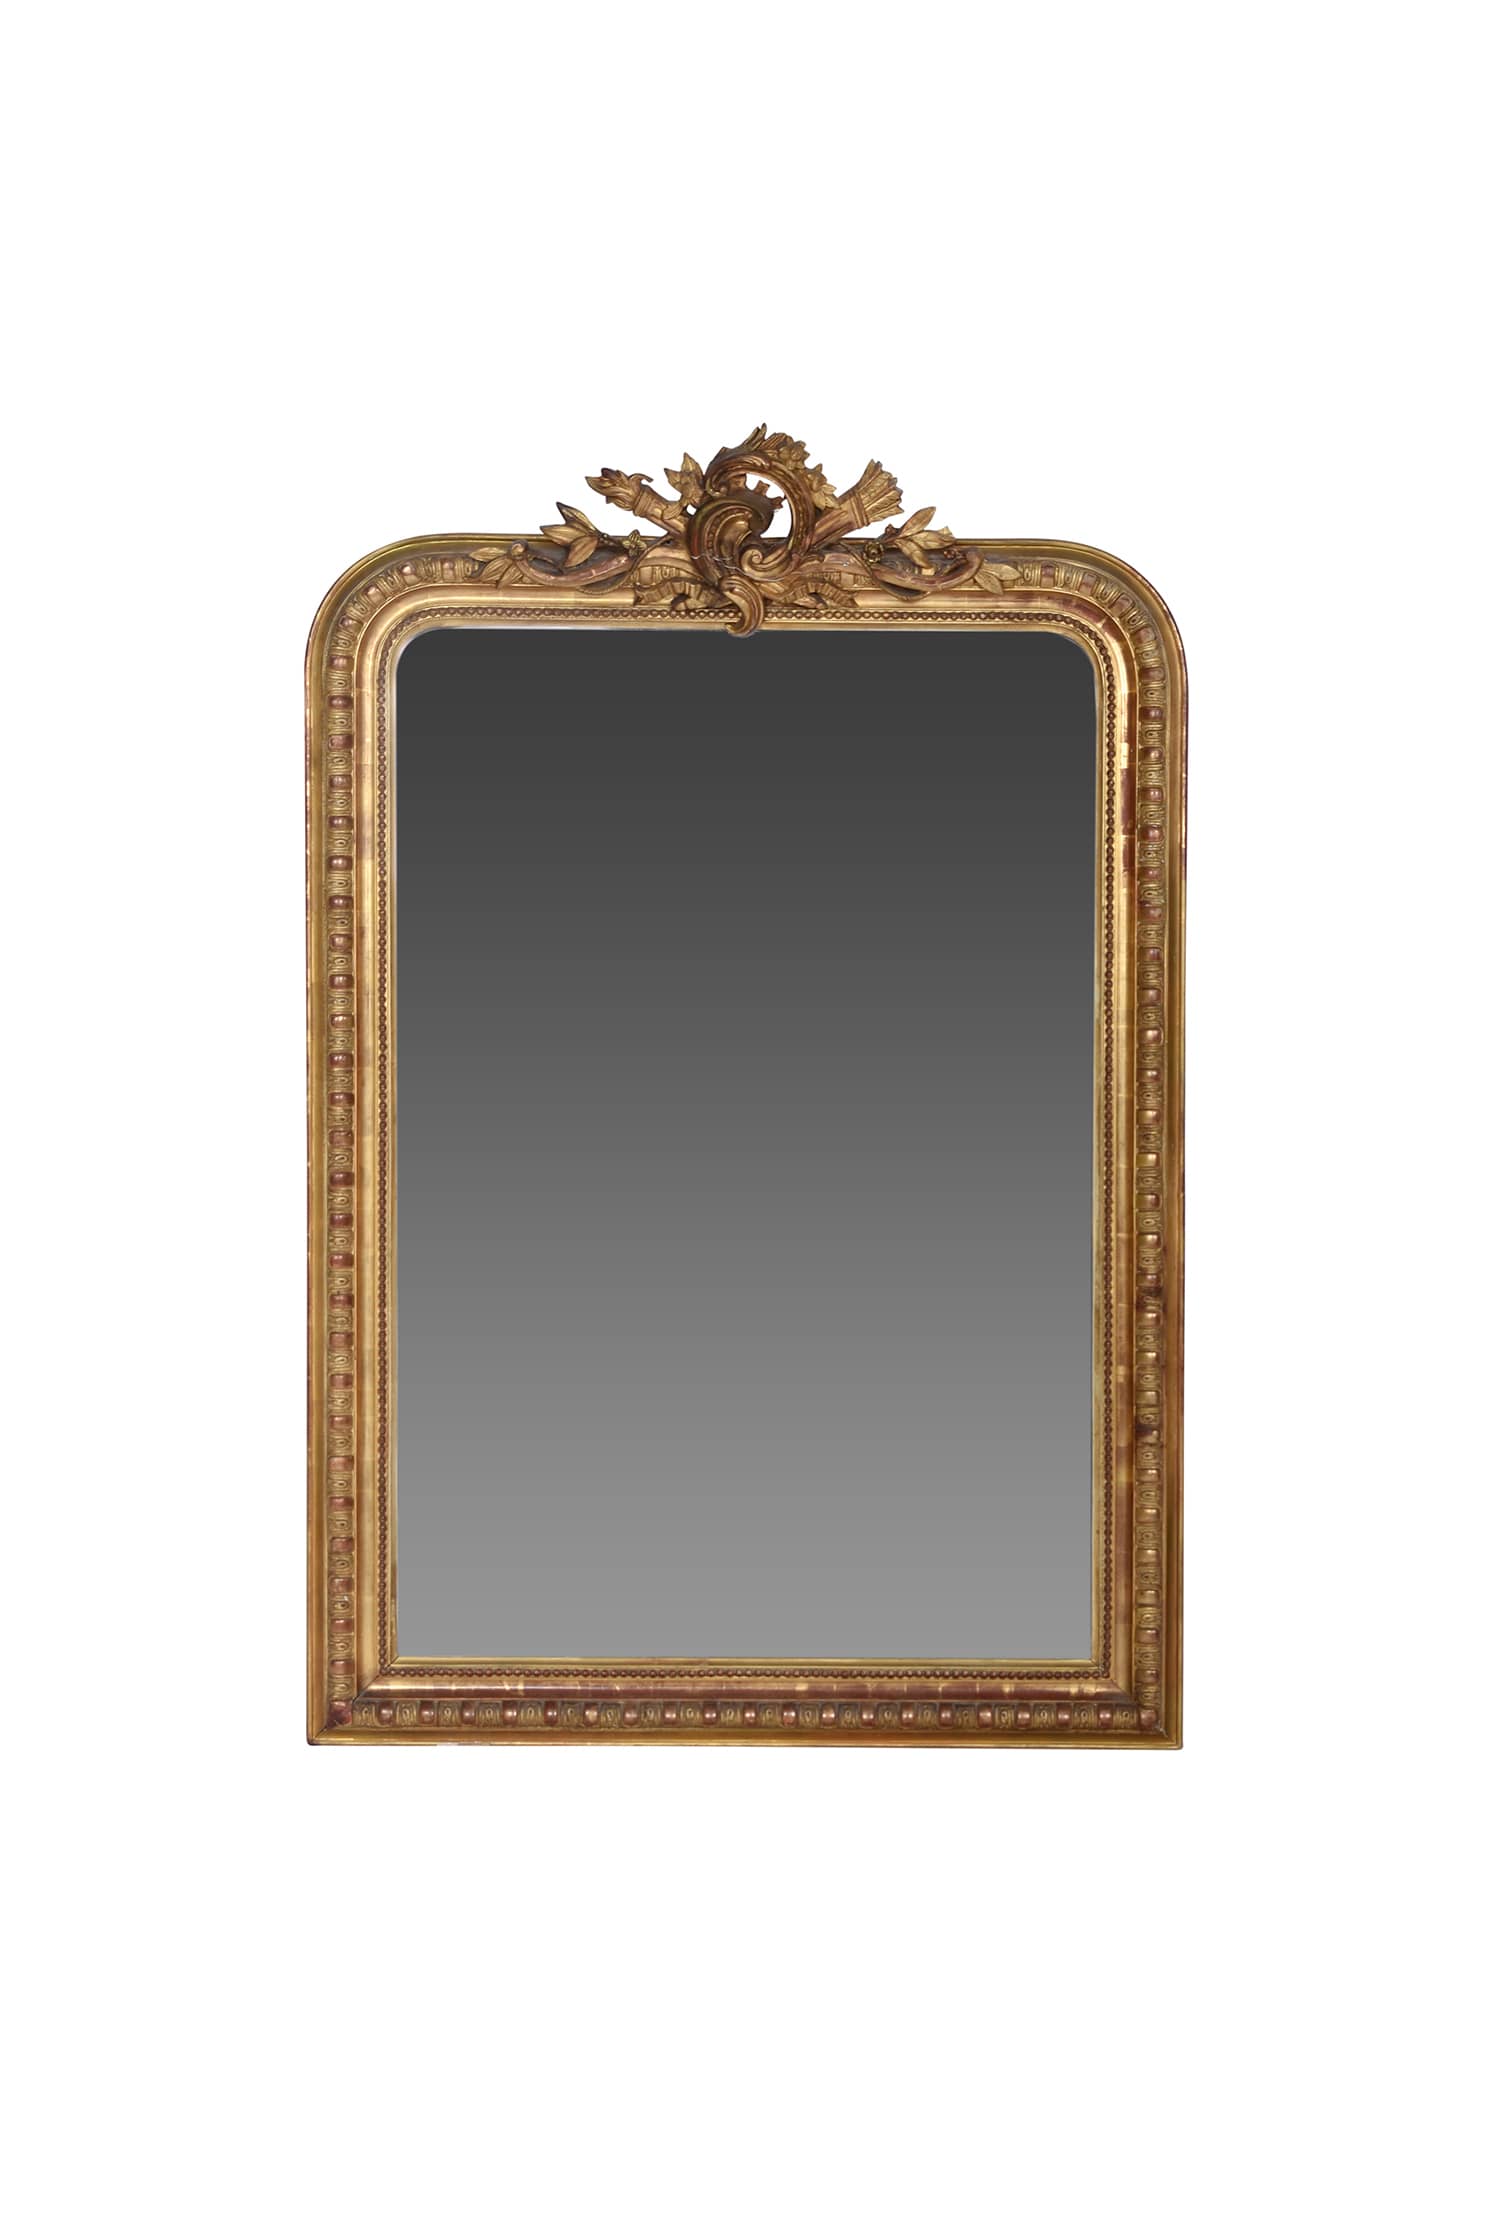 Antique French Gold Leaf Gilt Louis Philippe Style Mirror with Crest.  France 19th Century. - Shop LR Antiques